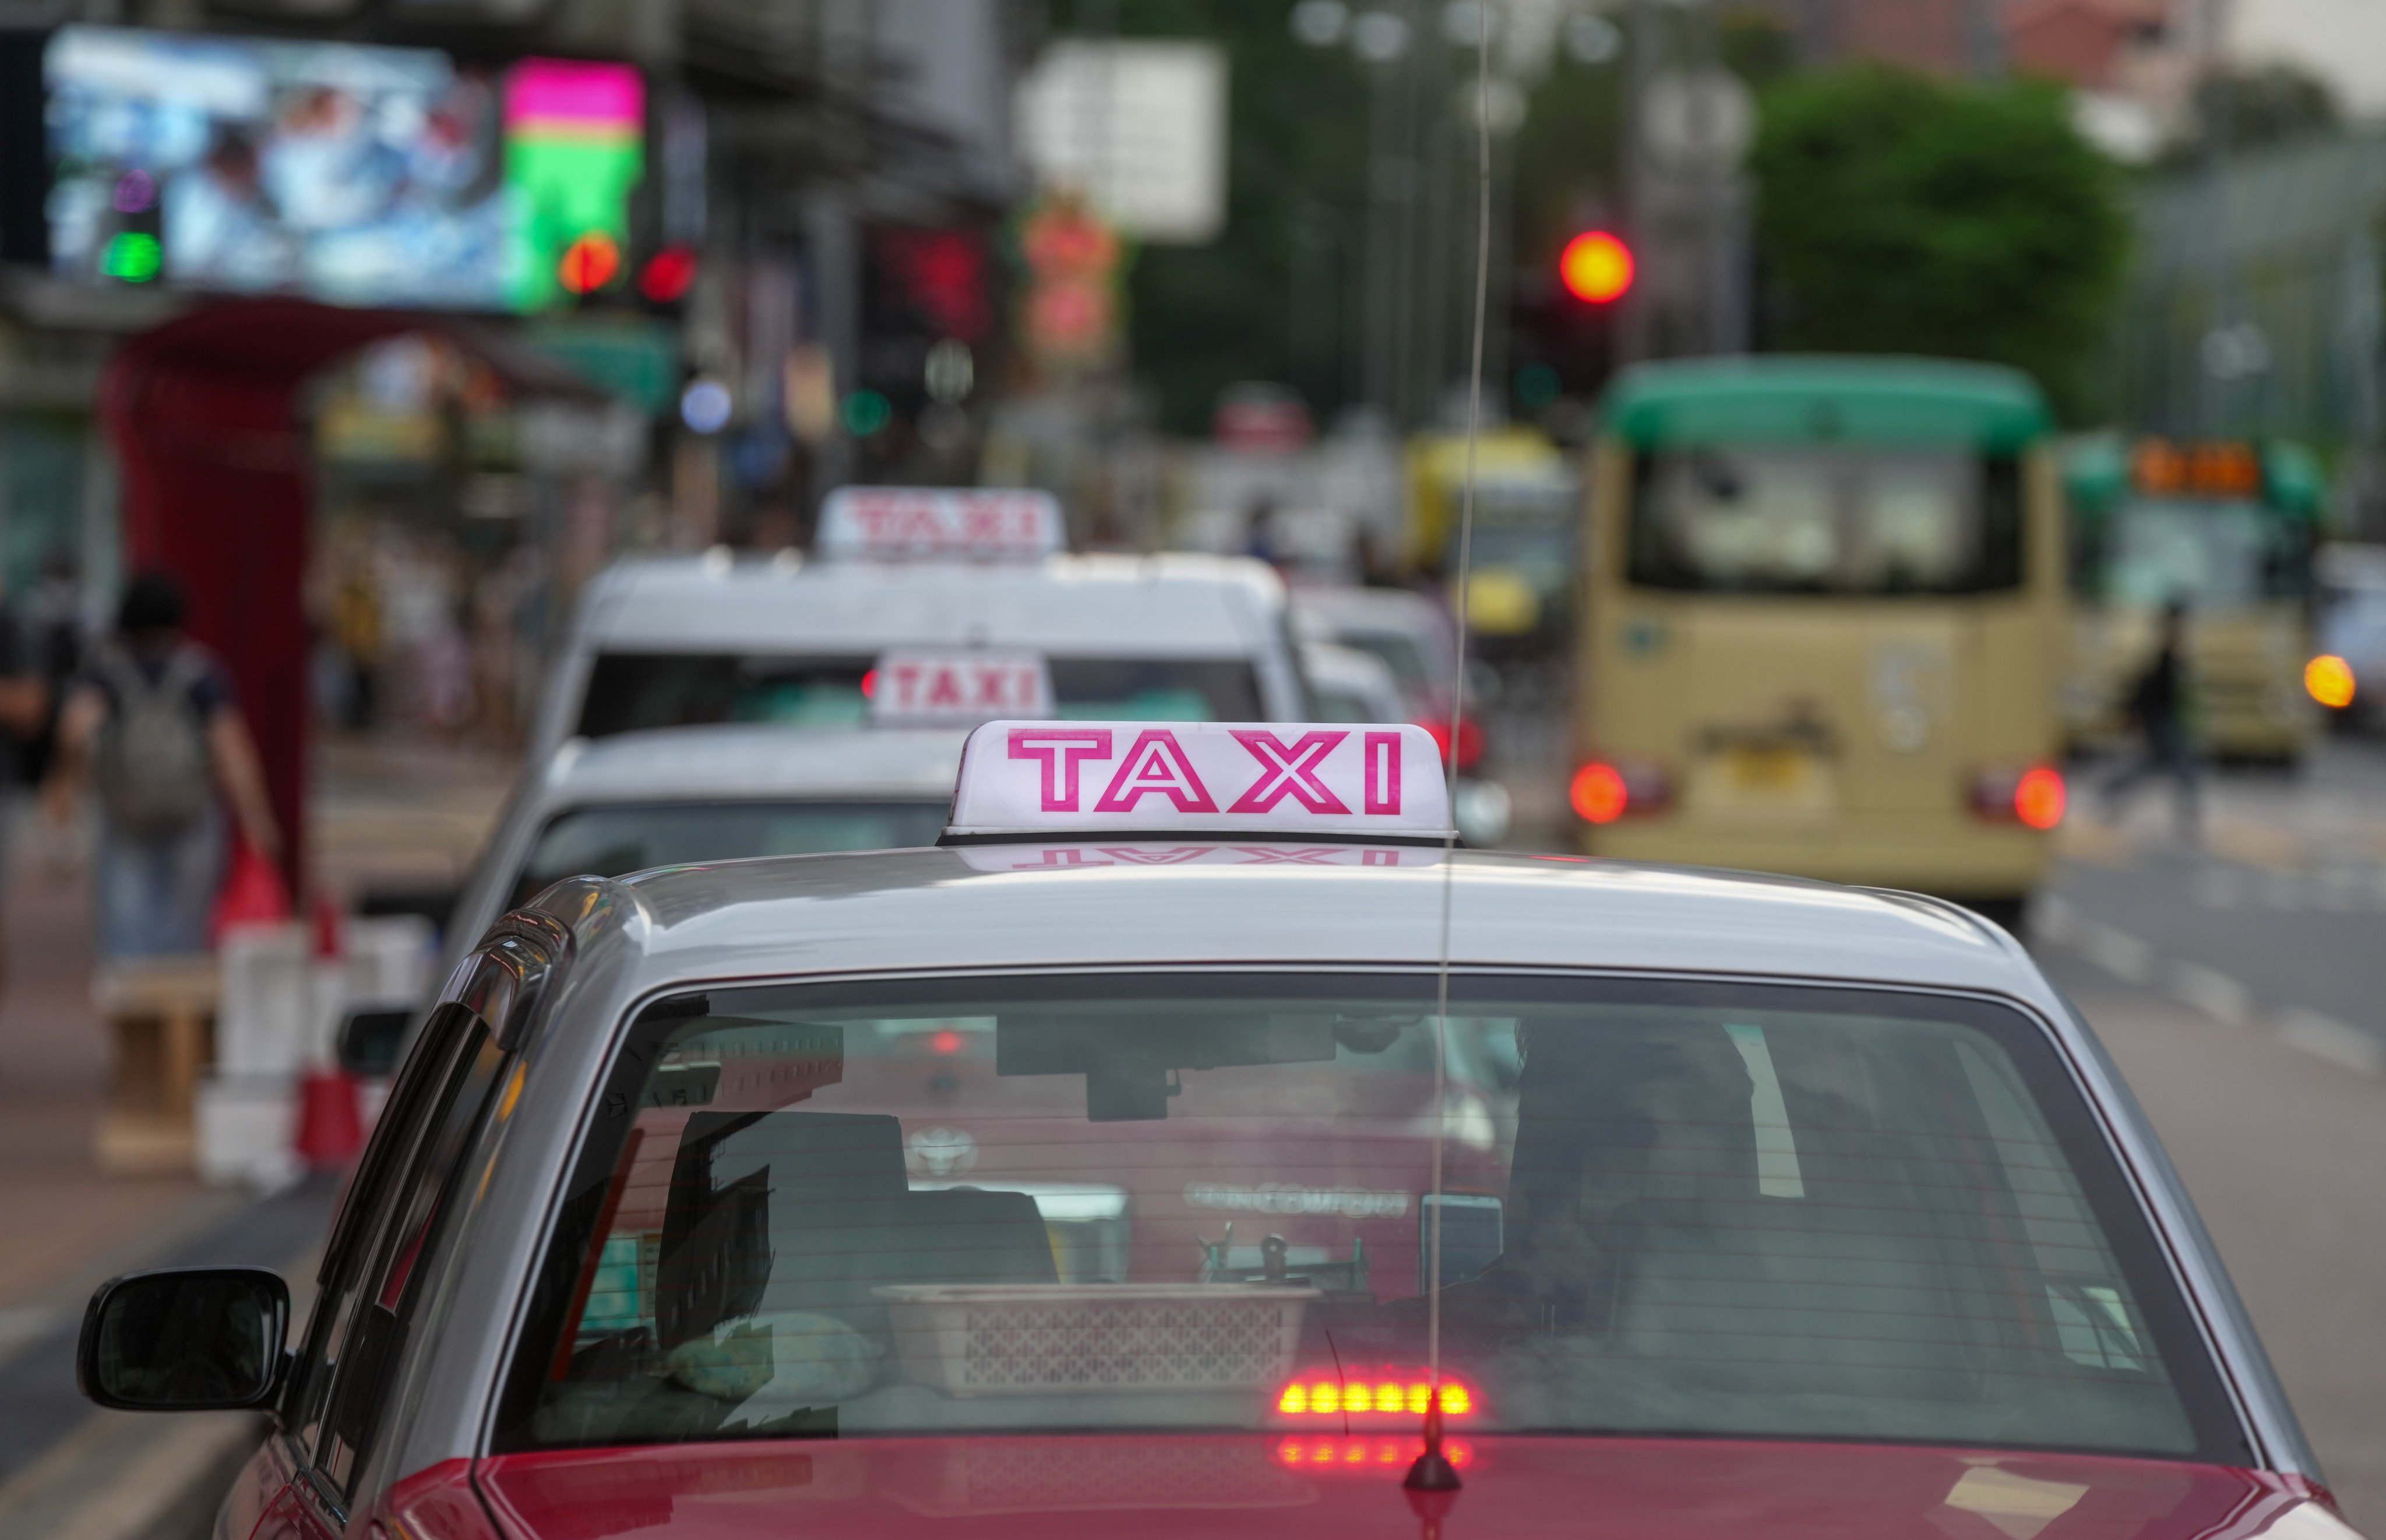 Hong Kong’s taxi trade has come under fire for poor service and the bad attitude of some drivers. Photo: Sam Tsang